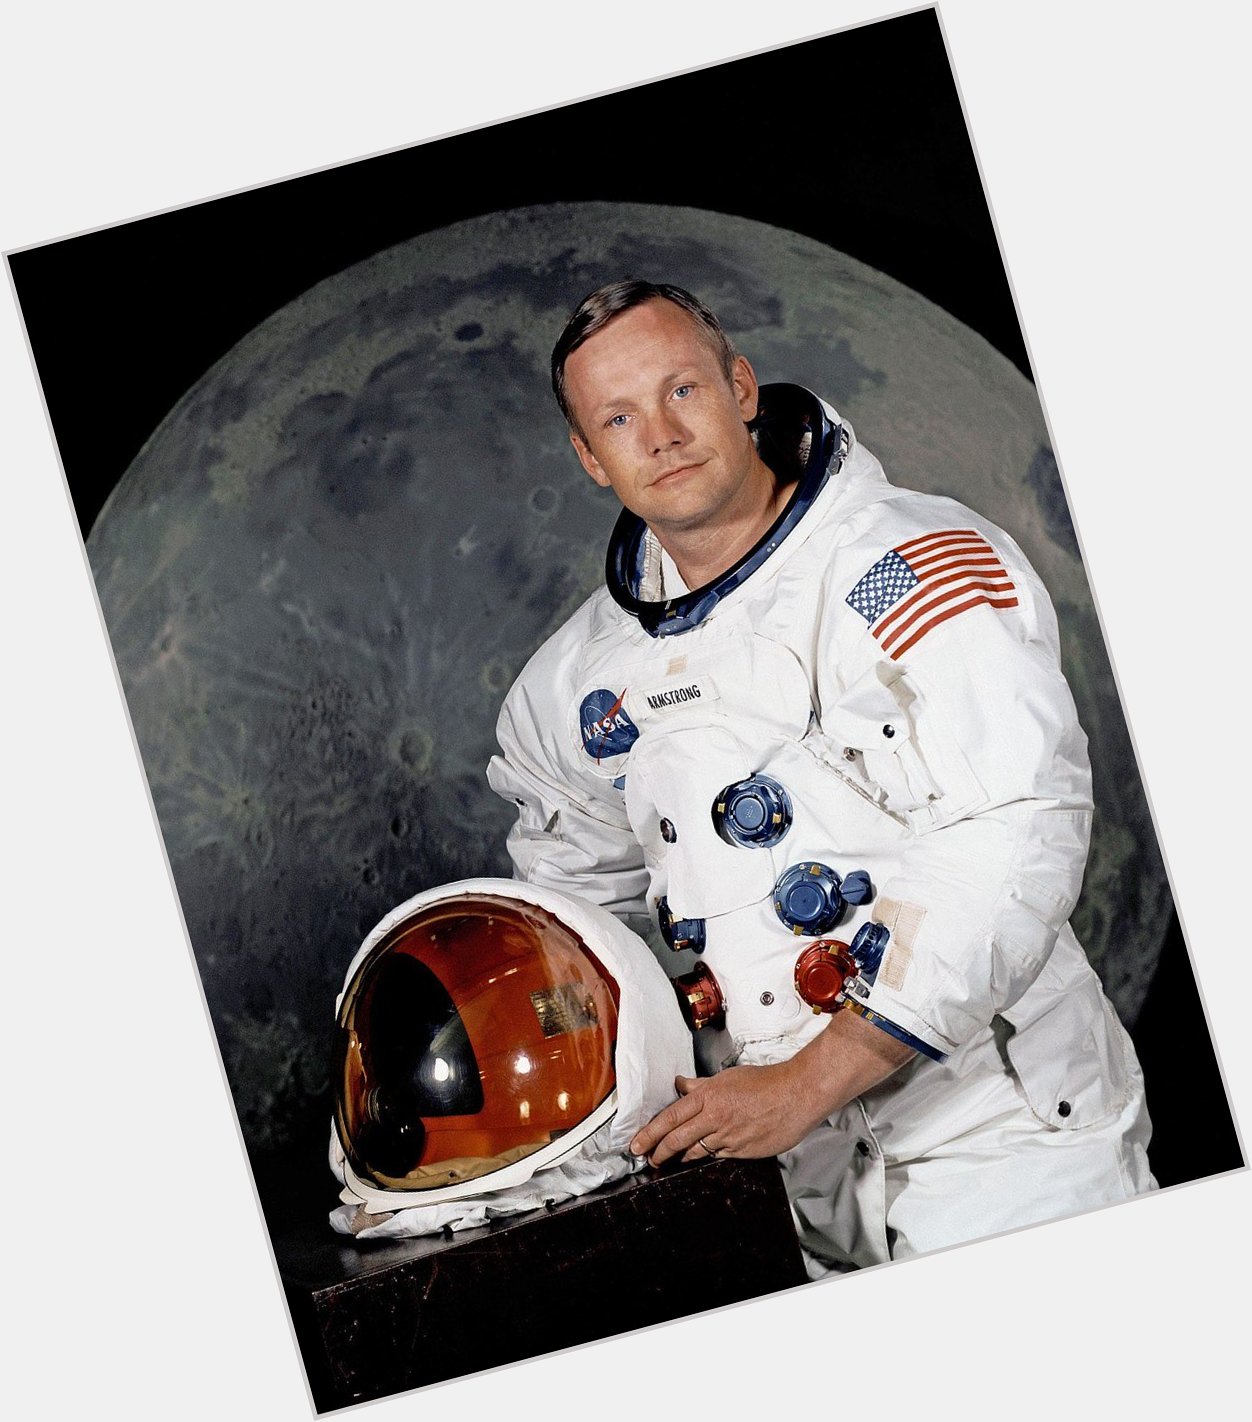 Happy birthday, Neil Armstrong, the first man to walk on the moon. 